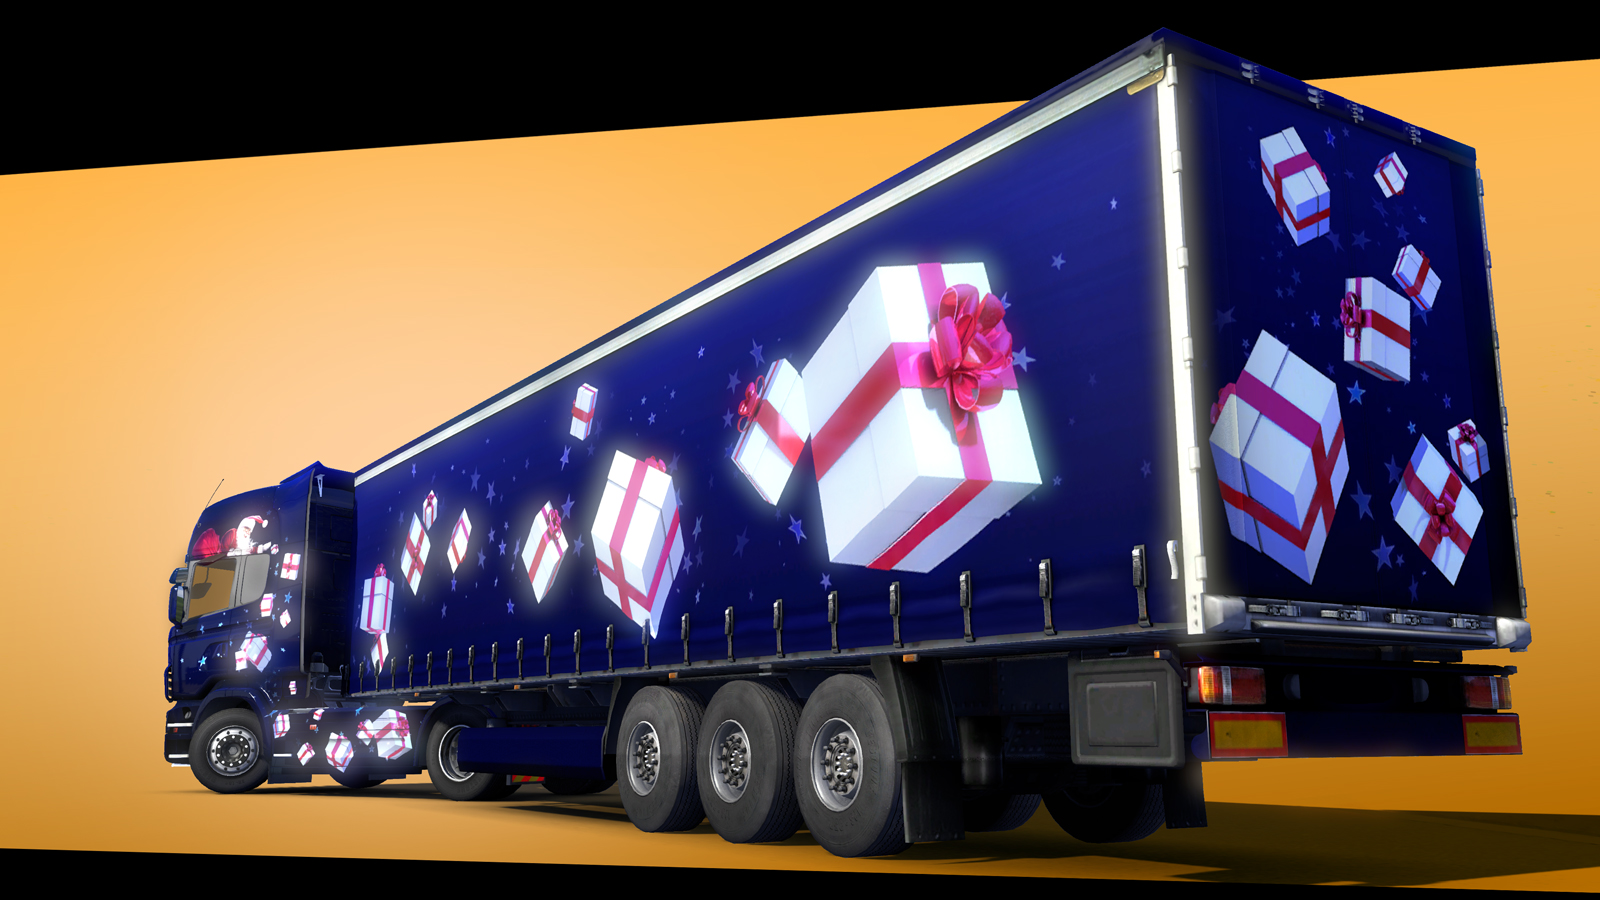 ets2_xmas_cargo_gifts_a_005.jpg